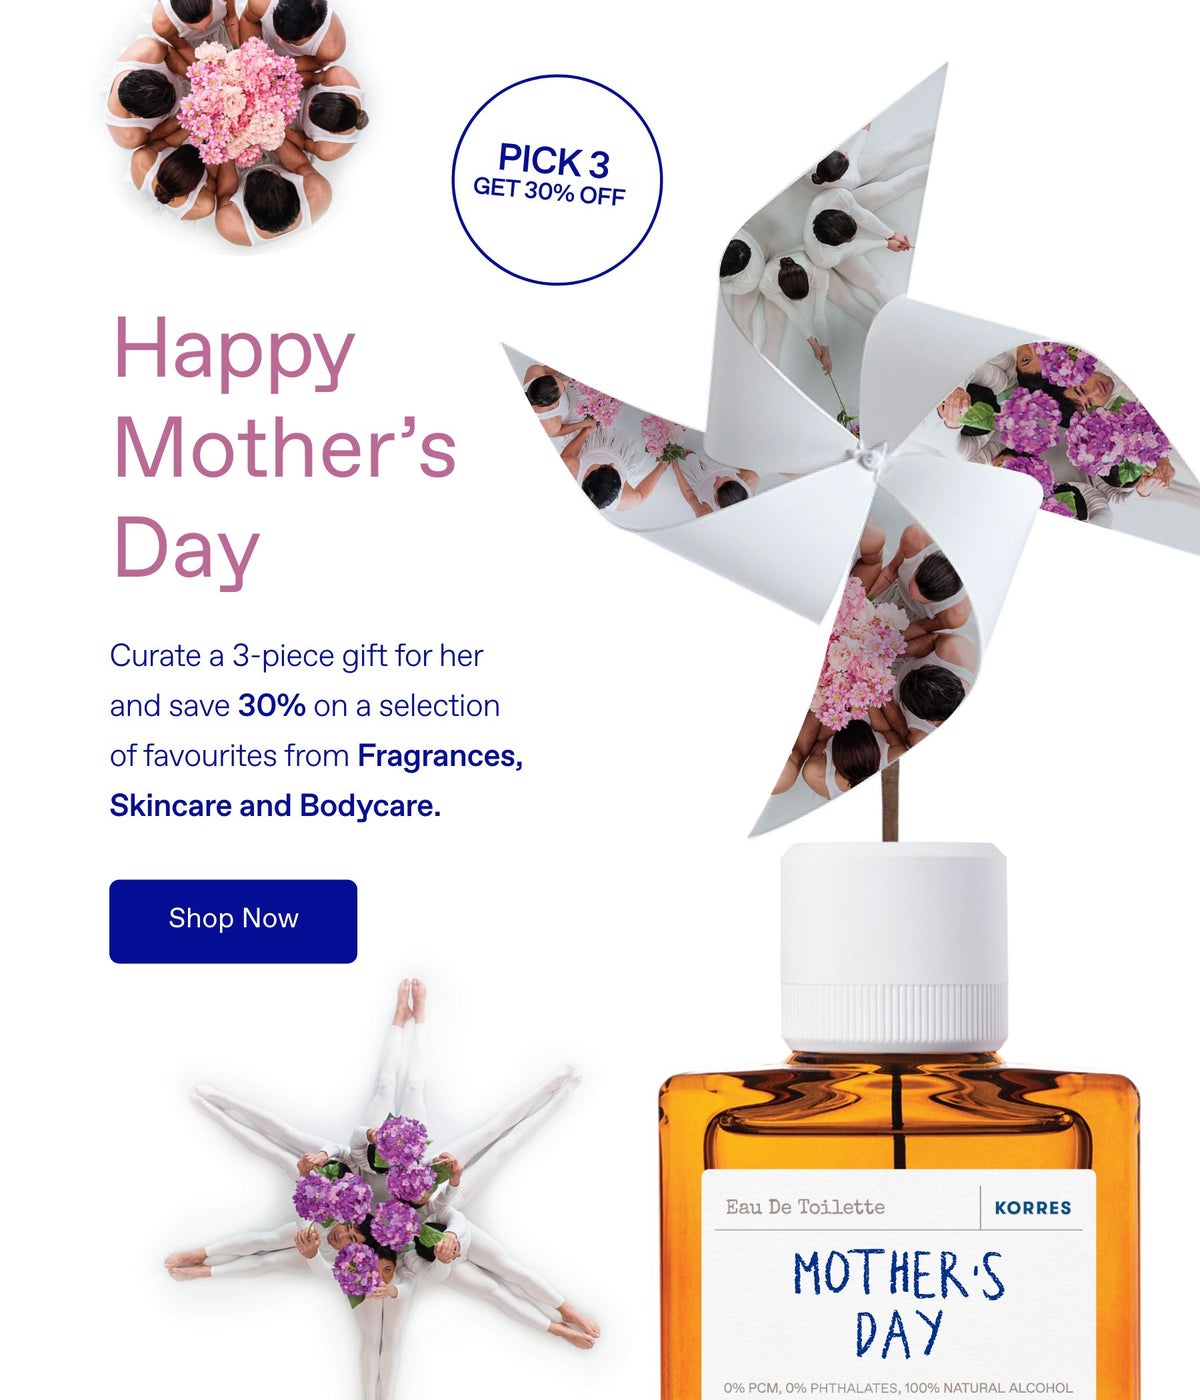 Mother's Day Offer - Buy 3 of Fragrances, Skincare and Bodycare and get 30% off